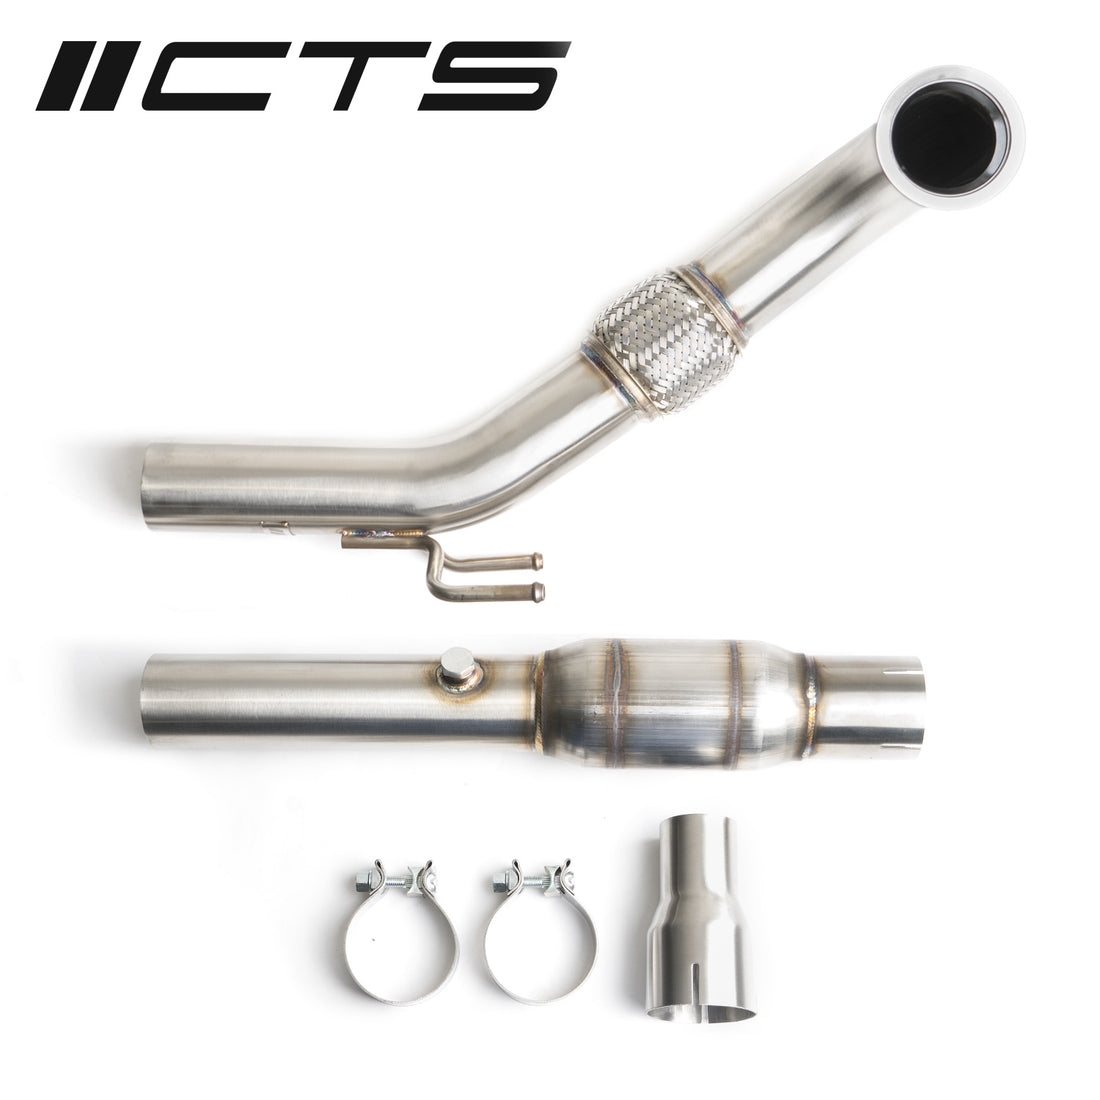 CTS Turbo Gen3 1.8T/2.0T TSI Downpipe with High-Flow Cat CTS Turbo EXH-DP-0013-CAT